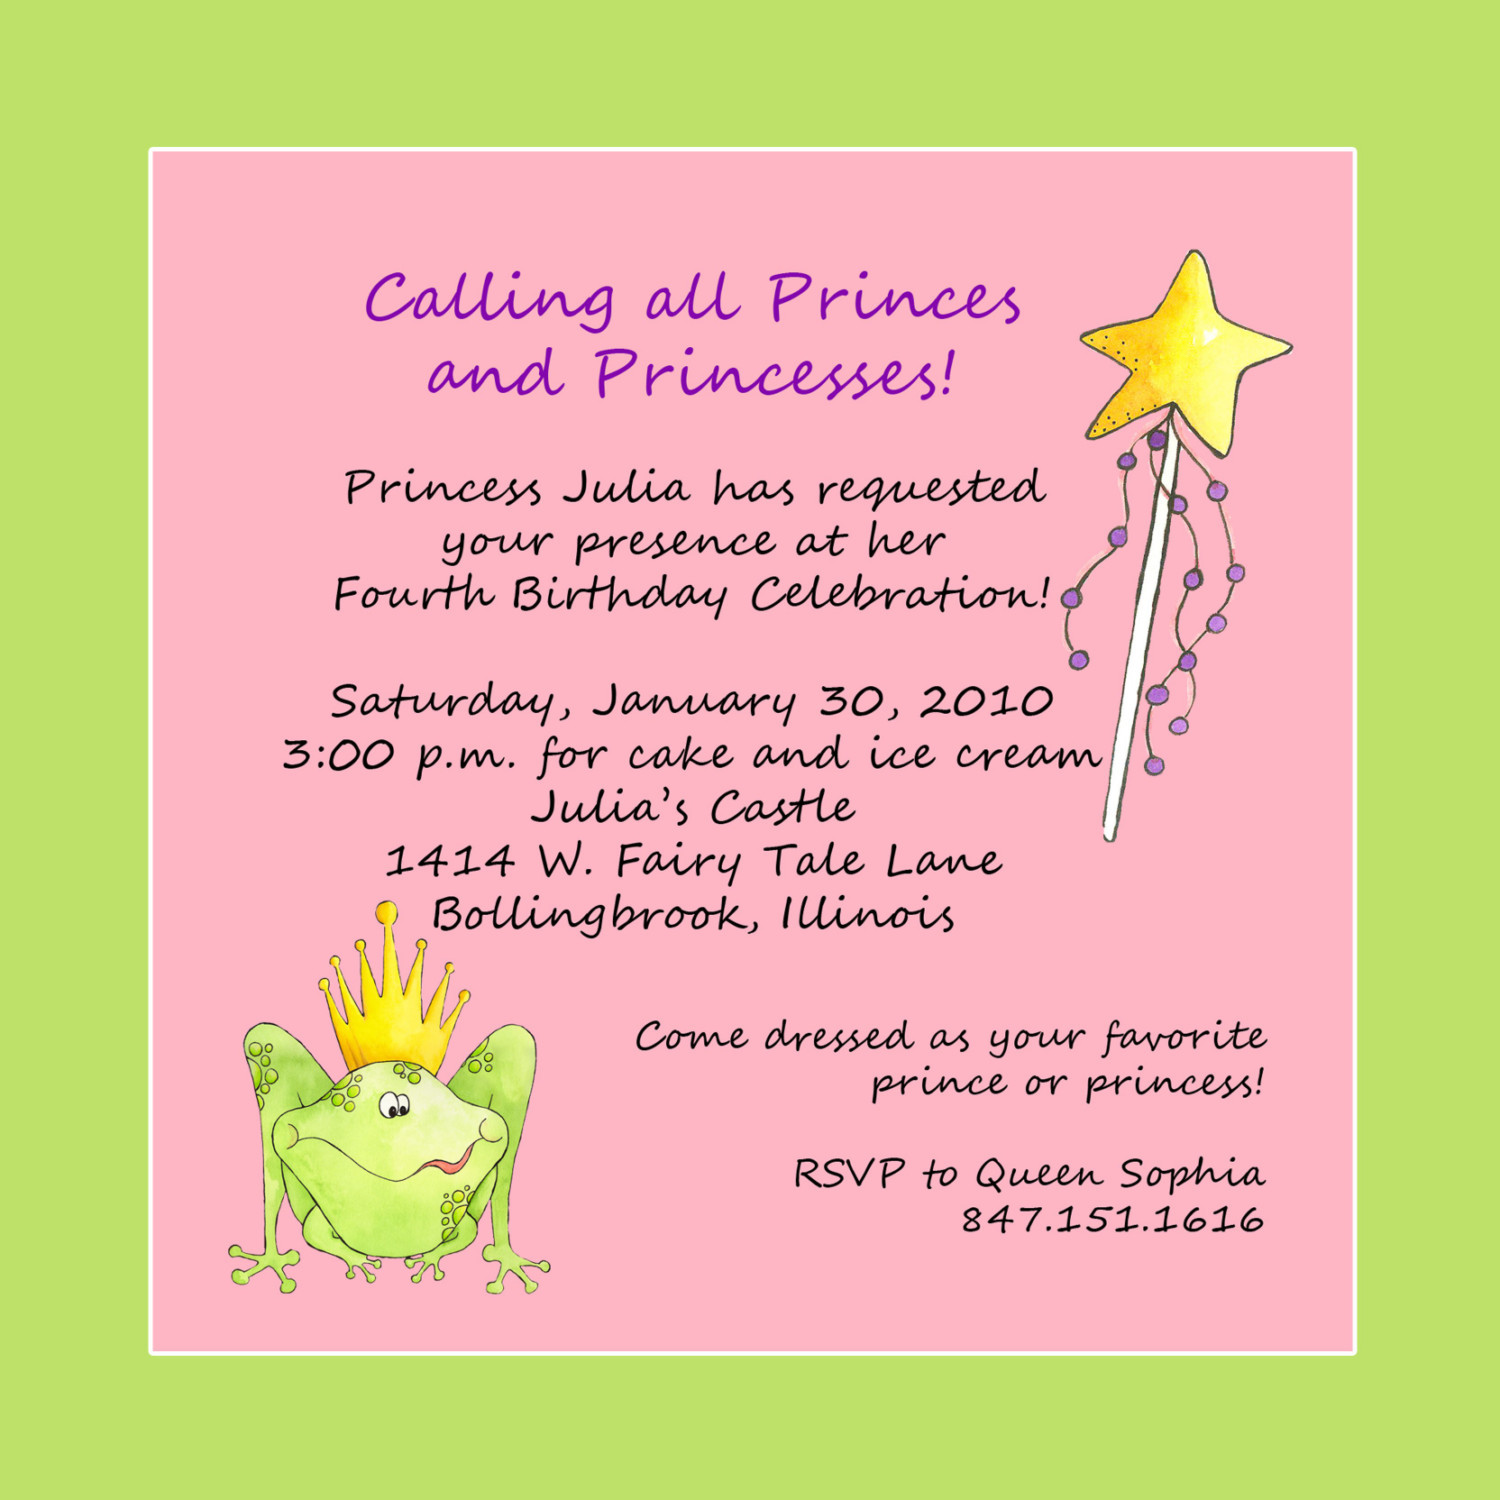 Birthday Invitations Quotes
 PARTY INVITATION QUOTES BIRTHDAY image quotes at